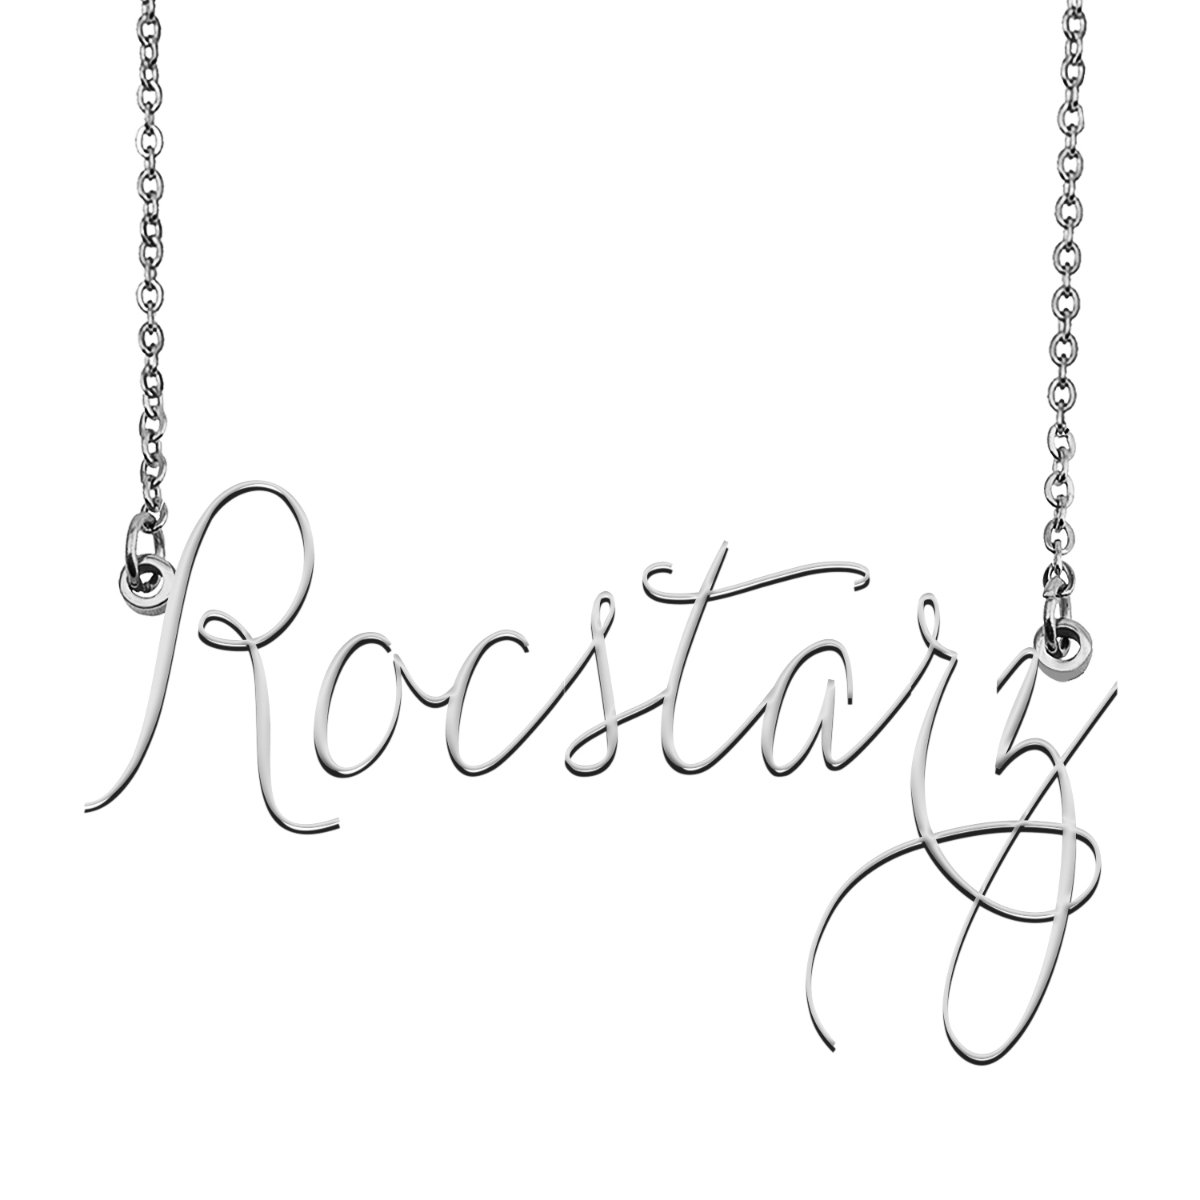 Rocstarz Name Necklace Custom Personalized Name Plate Jewelry For